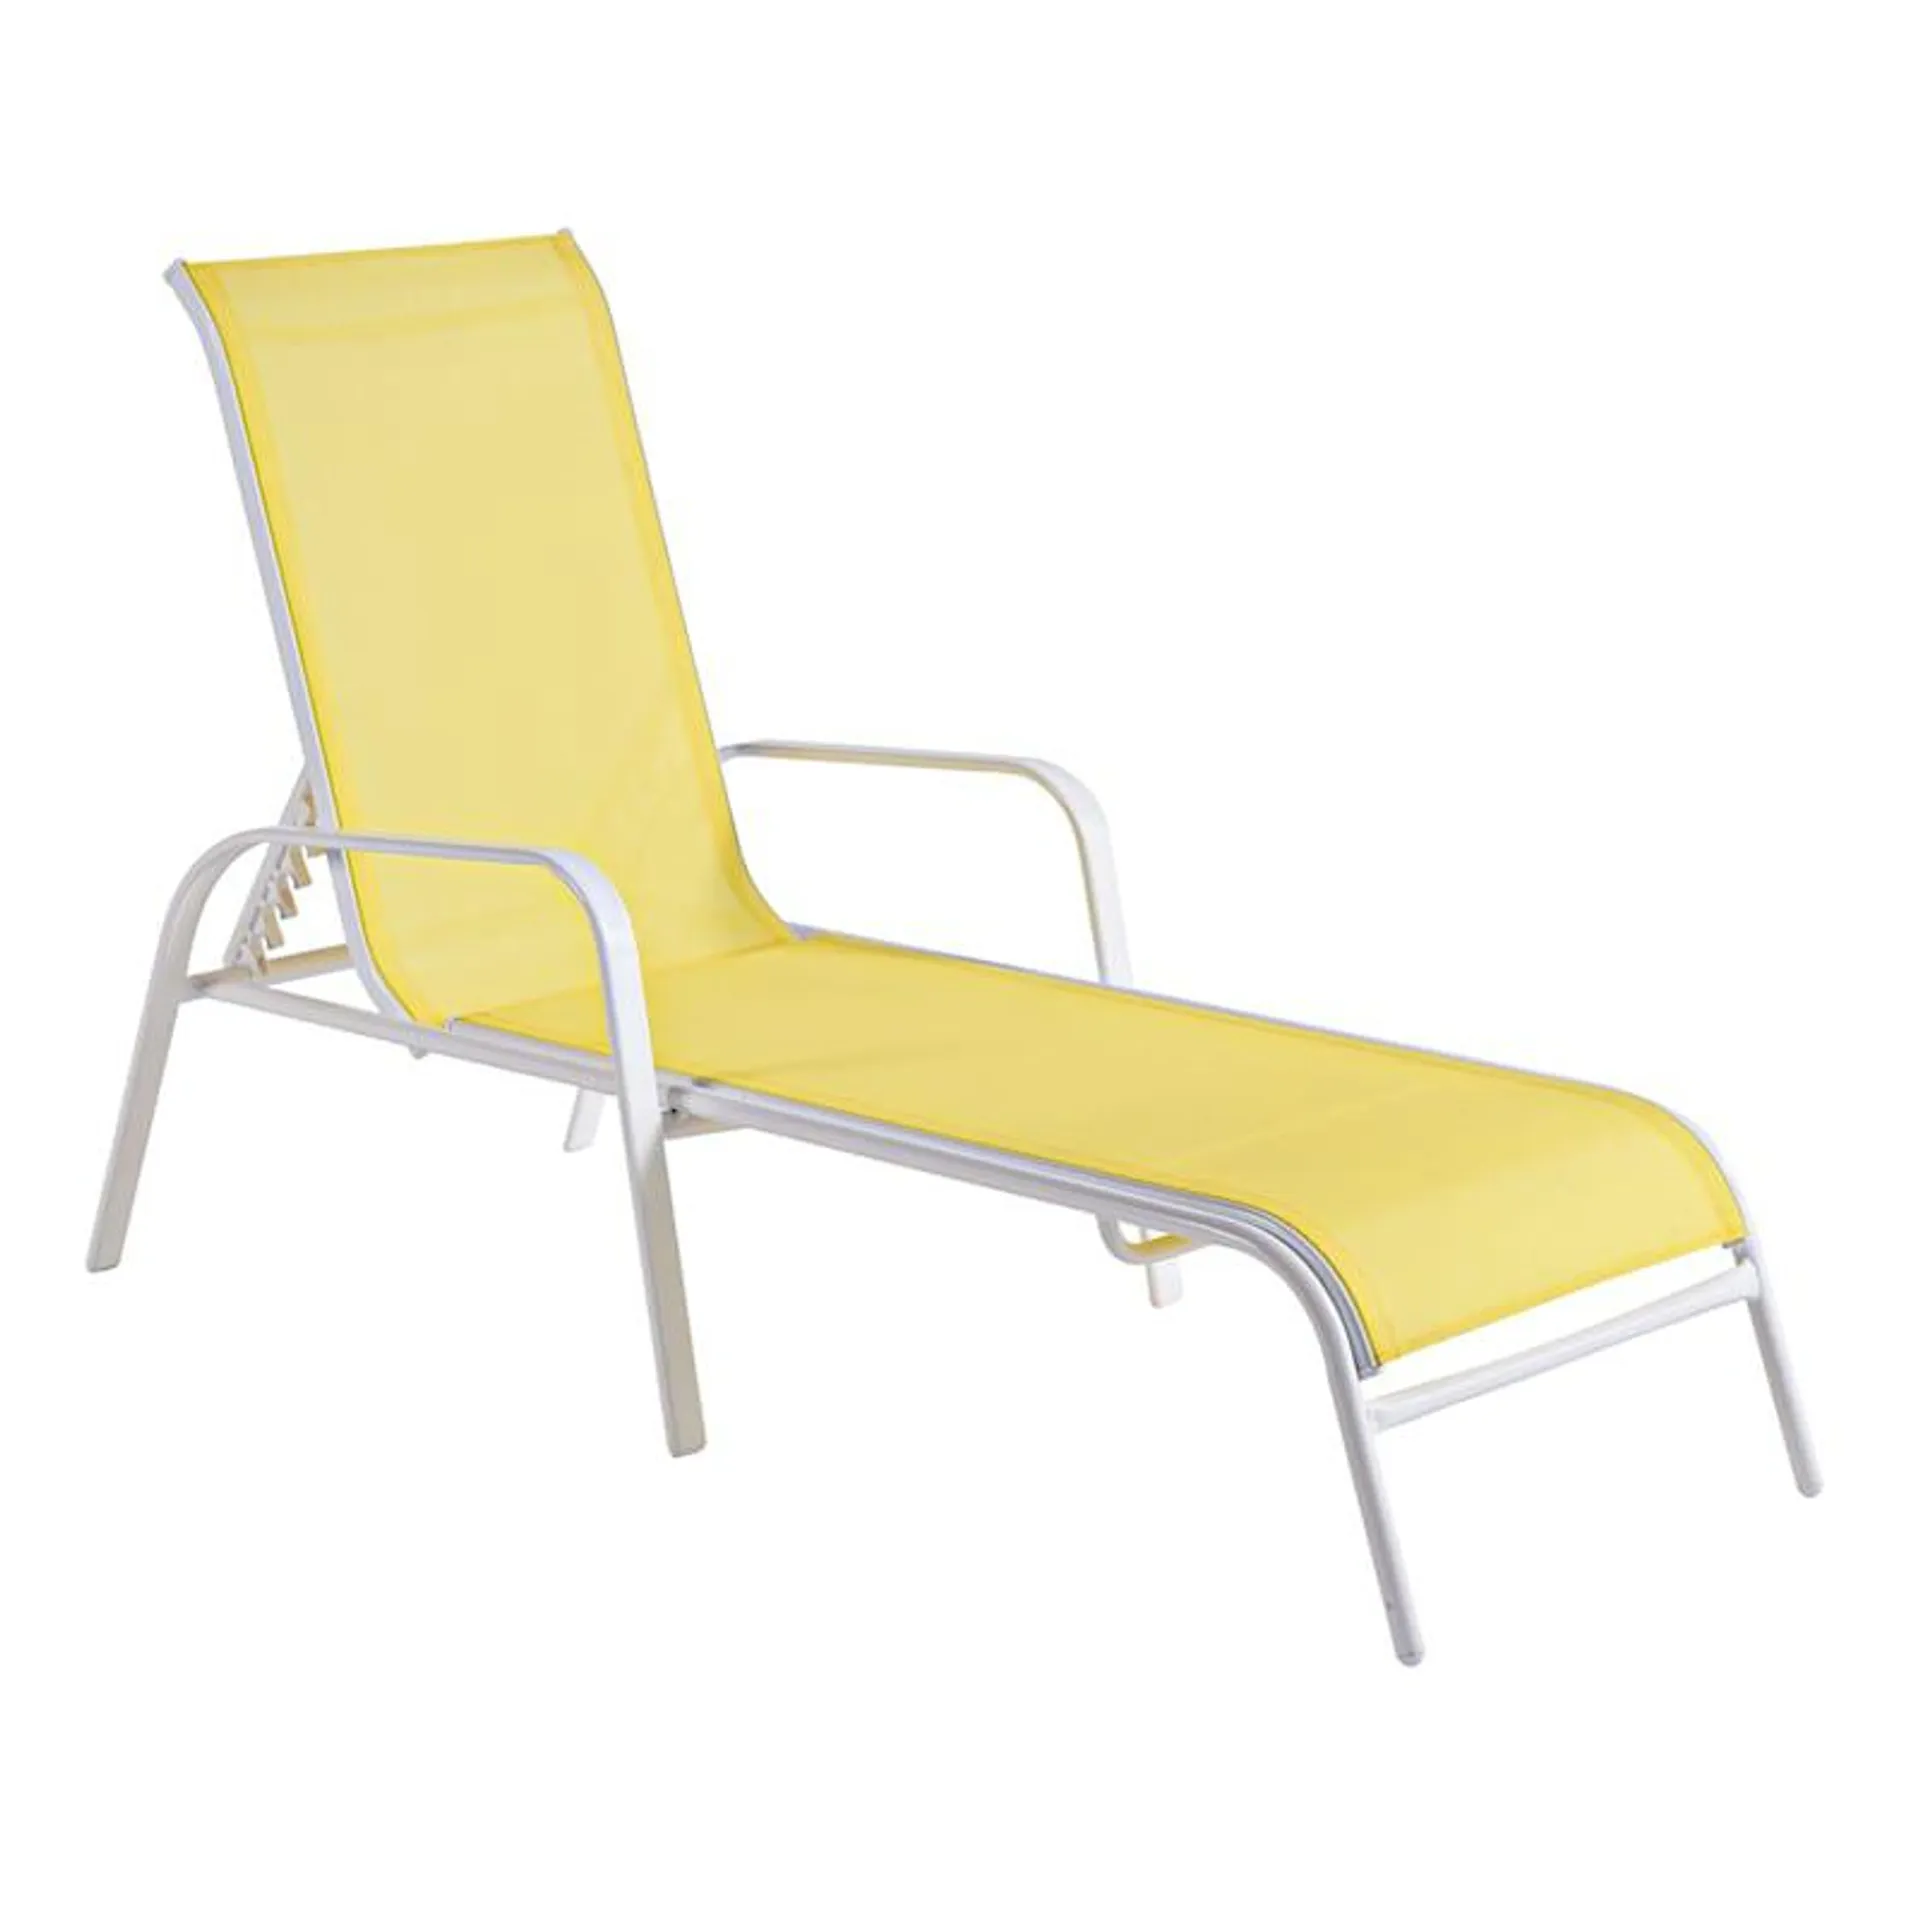 Stackable Yellow Sling Outdoor Chaise Lounge Chair with White Frame